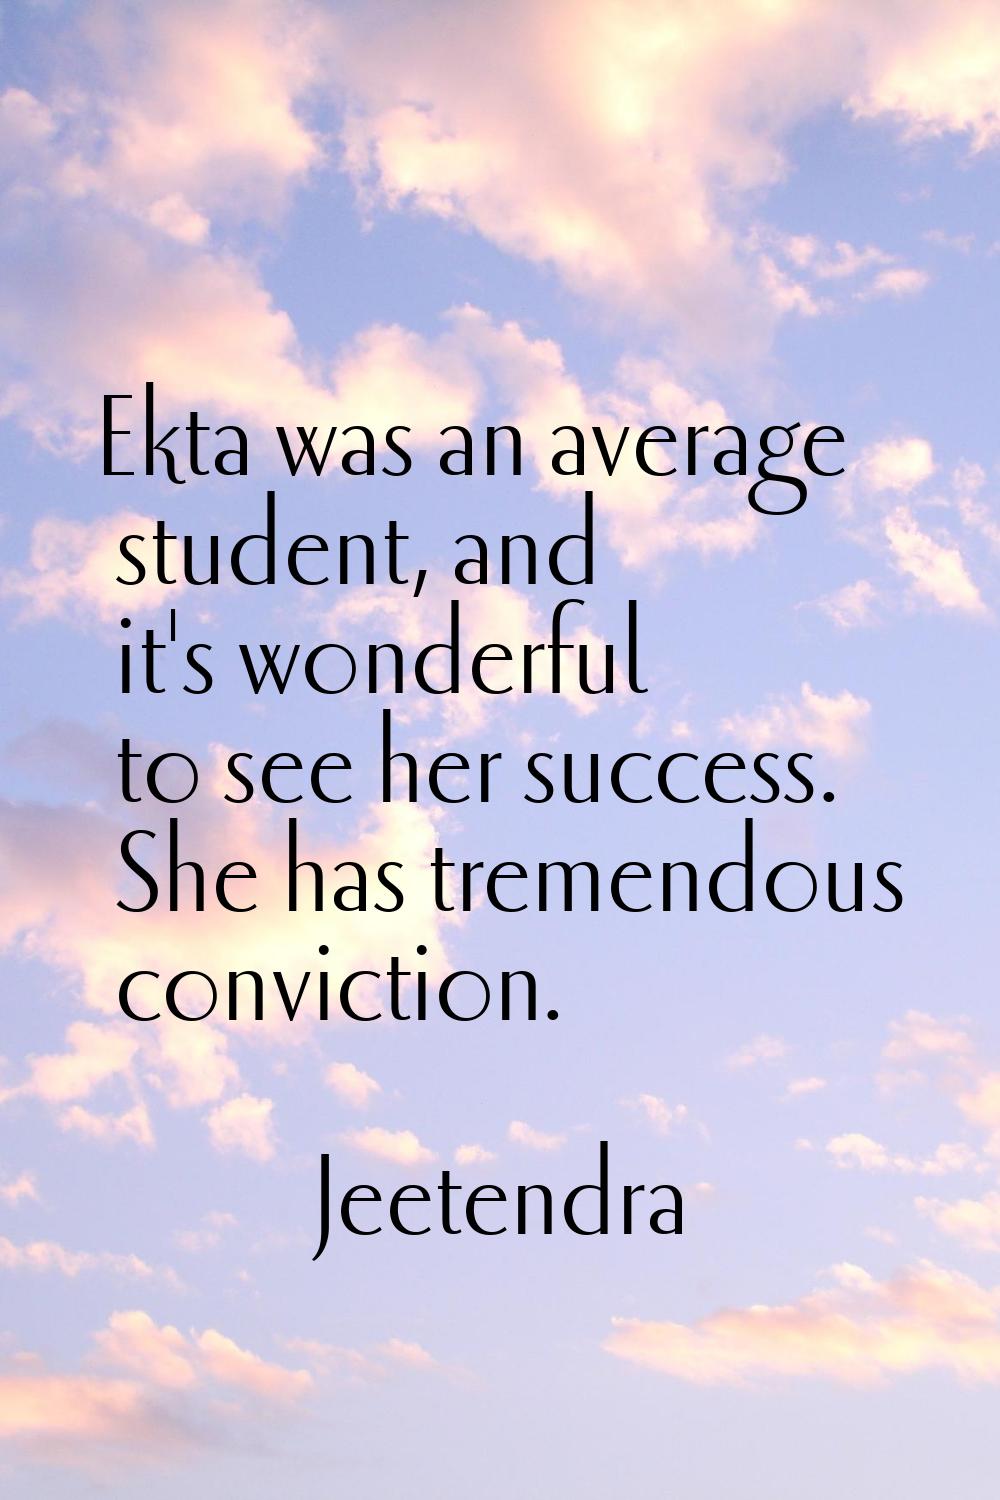 Ekta was an average student, and it's wonderful to see her success. She has tremendous conviction.